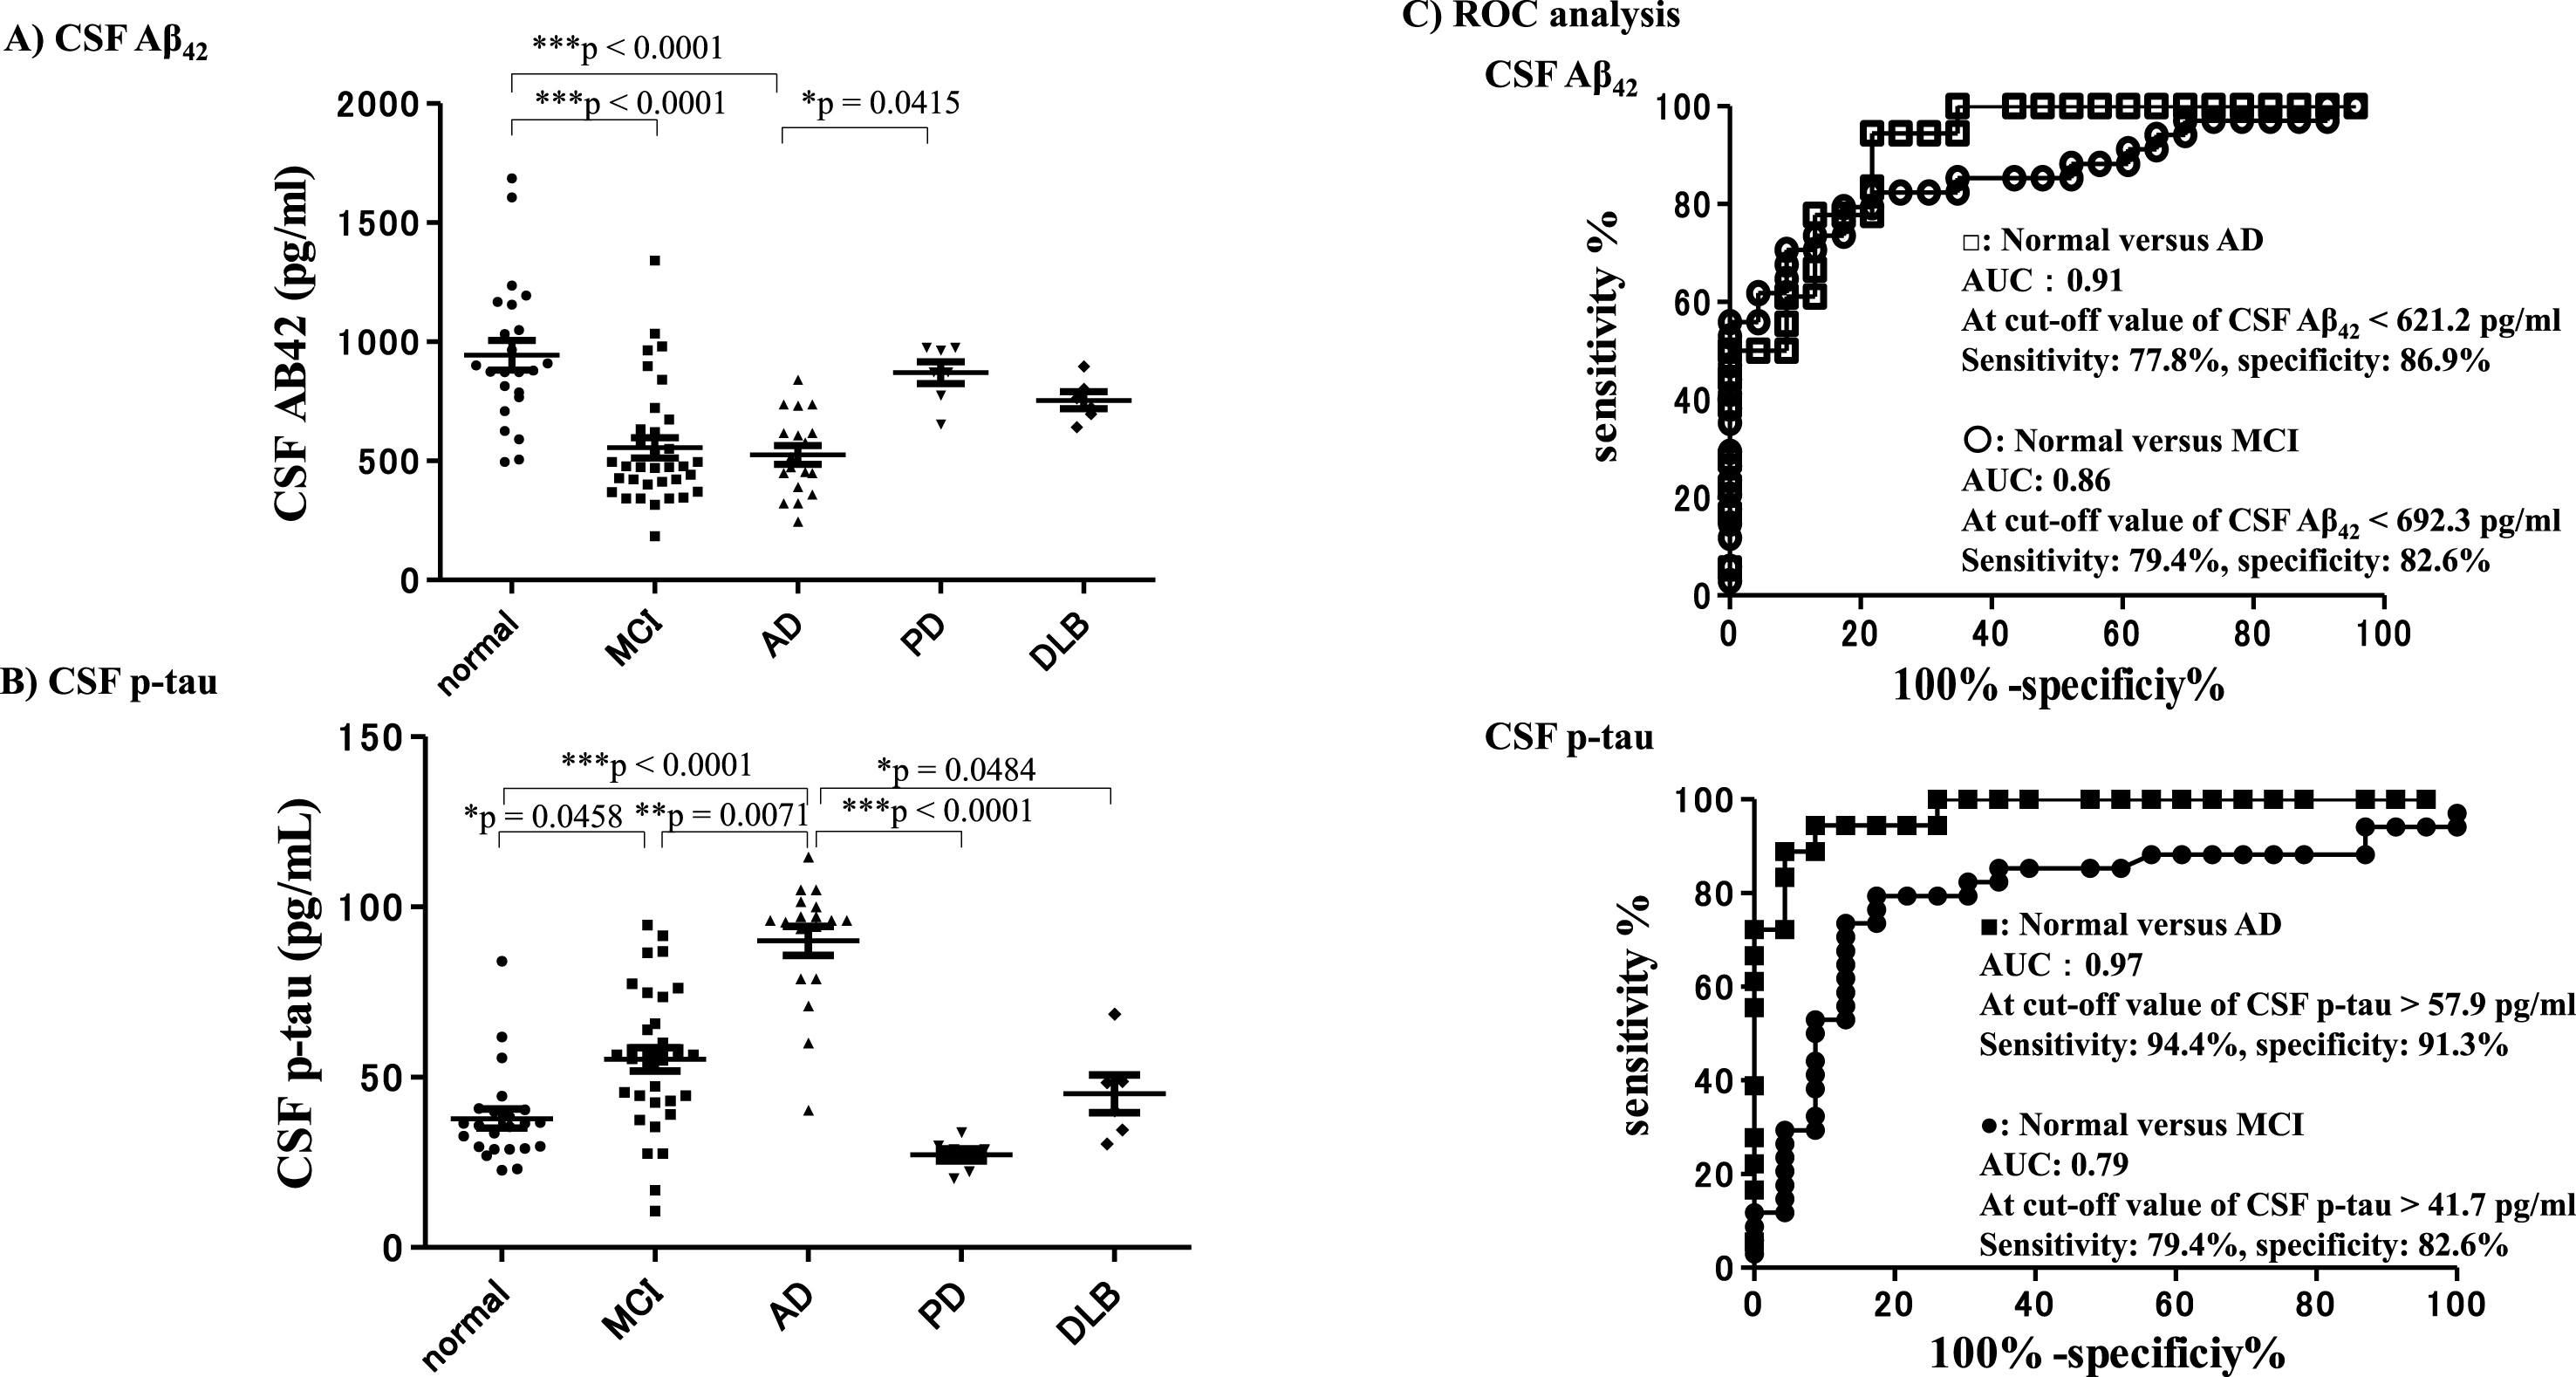 CSF-Aβ42 and CSF-p-tau 7 years after baseline. CSF-Aβ42 and CSF-p-tau measured at the final point (7 years after baseline) in each group. CSF-Aβ42 levels of subjects in the AD and MCI groups were significantly lower compared with subjects who remained cognitively normal (A). CSF-p-tau levels were significantly higher in the AD group compared with subjects who remained cognitively normal and with the other neurological disease groups. CSF p-tau levels in subjects with AD were significantly higher than those in subjects with MCI and subjects with DLB (B). ROC analysis revealed that the level of CSF-Aβ42 7 years after baseline could differentiate subjects with AD from those who remained cognitively normal with an AUC of 0.91, sensitivity of 77.8%, and specificity of 86.9%, with a cut-off value of <621.2 pg/ml. The level of CSF-Aβ42 differentiated subjects with MCI from those who remained cognitively normal with an AUC of 0.86, sensitivity of 79.4%, and specificity of 82.6% with a cut-off value of <692.3 pg/ml. CSF p-tau levels could differentiate AD subjects from those who remained cognitively normal with an AUC of 0.97, sensitivity of 94.4%, and specificity of 91.3% with a cut-off value of >57.9 pg/ml, and differentiate MCI subjects from normal subjects with an AUC of 0.79, sensitivity of 79.4%, and specificity of 82.6% with a cut-off value of >41.7 pg/ml (C). Thus, the CSF-Aβ42 and CSF p-tau results revealed that subjects in the AD group exhibited AD-specific biomarker changes.